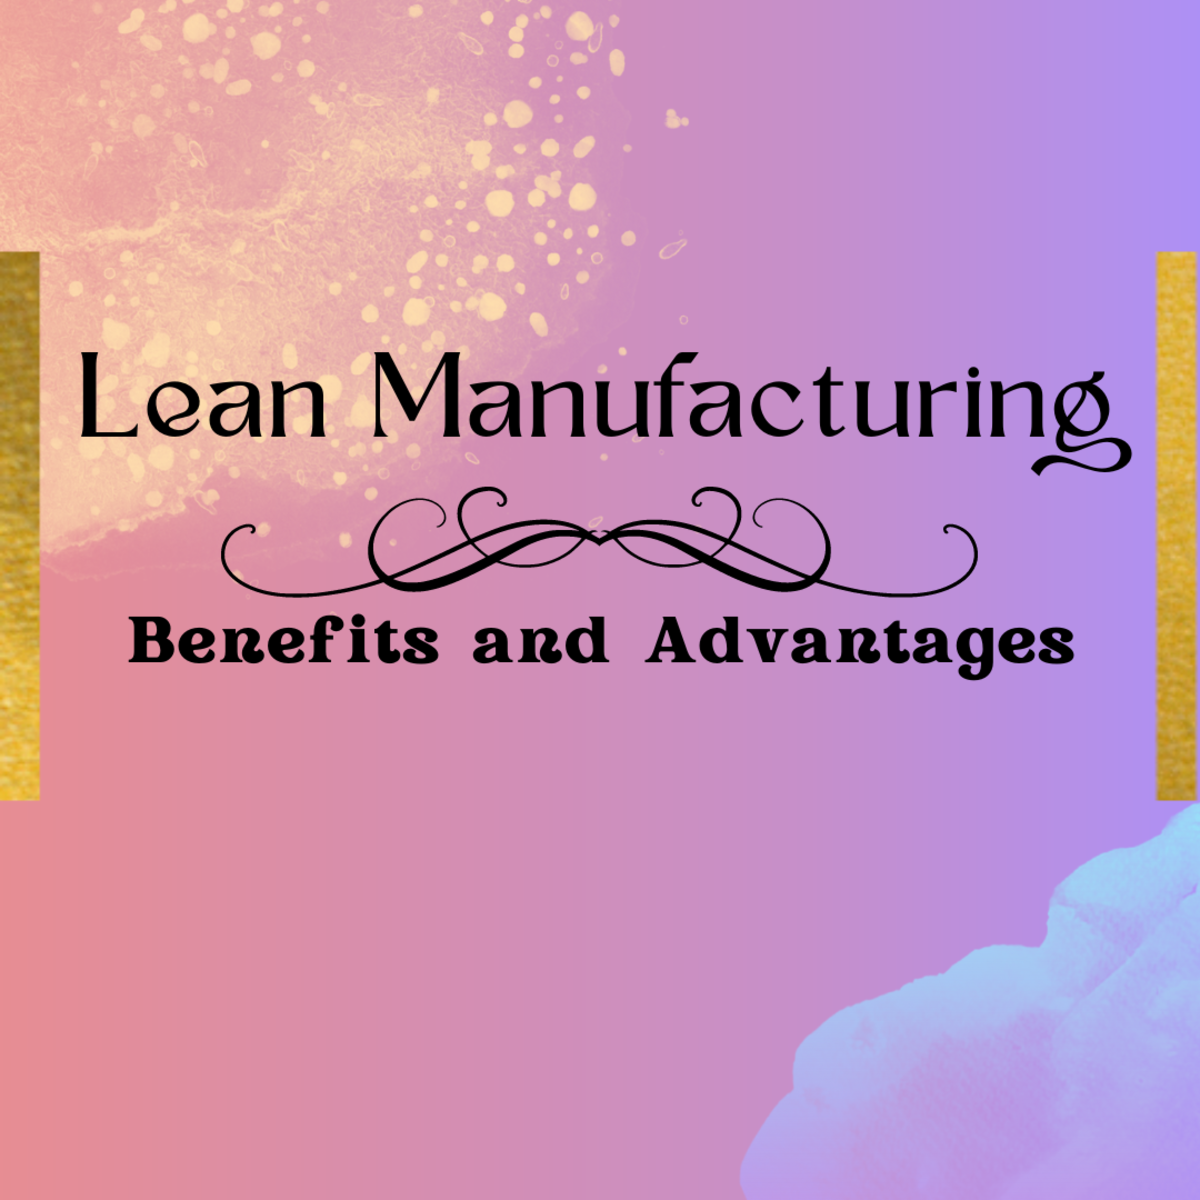 Benefits and Advantages of Lean Manufacturing